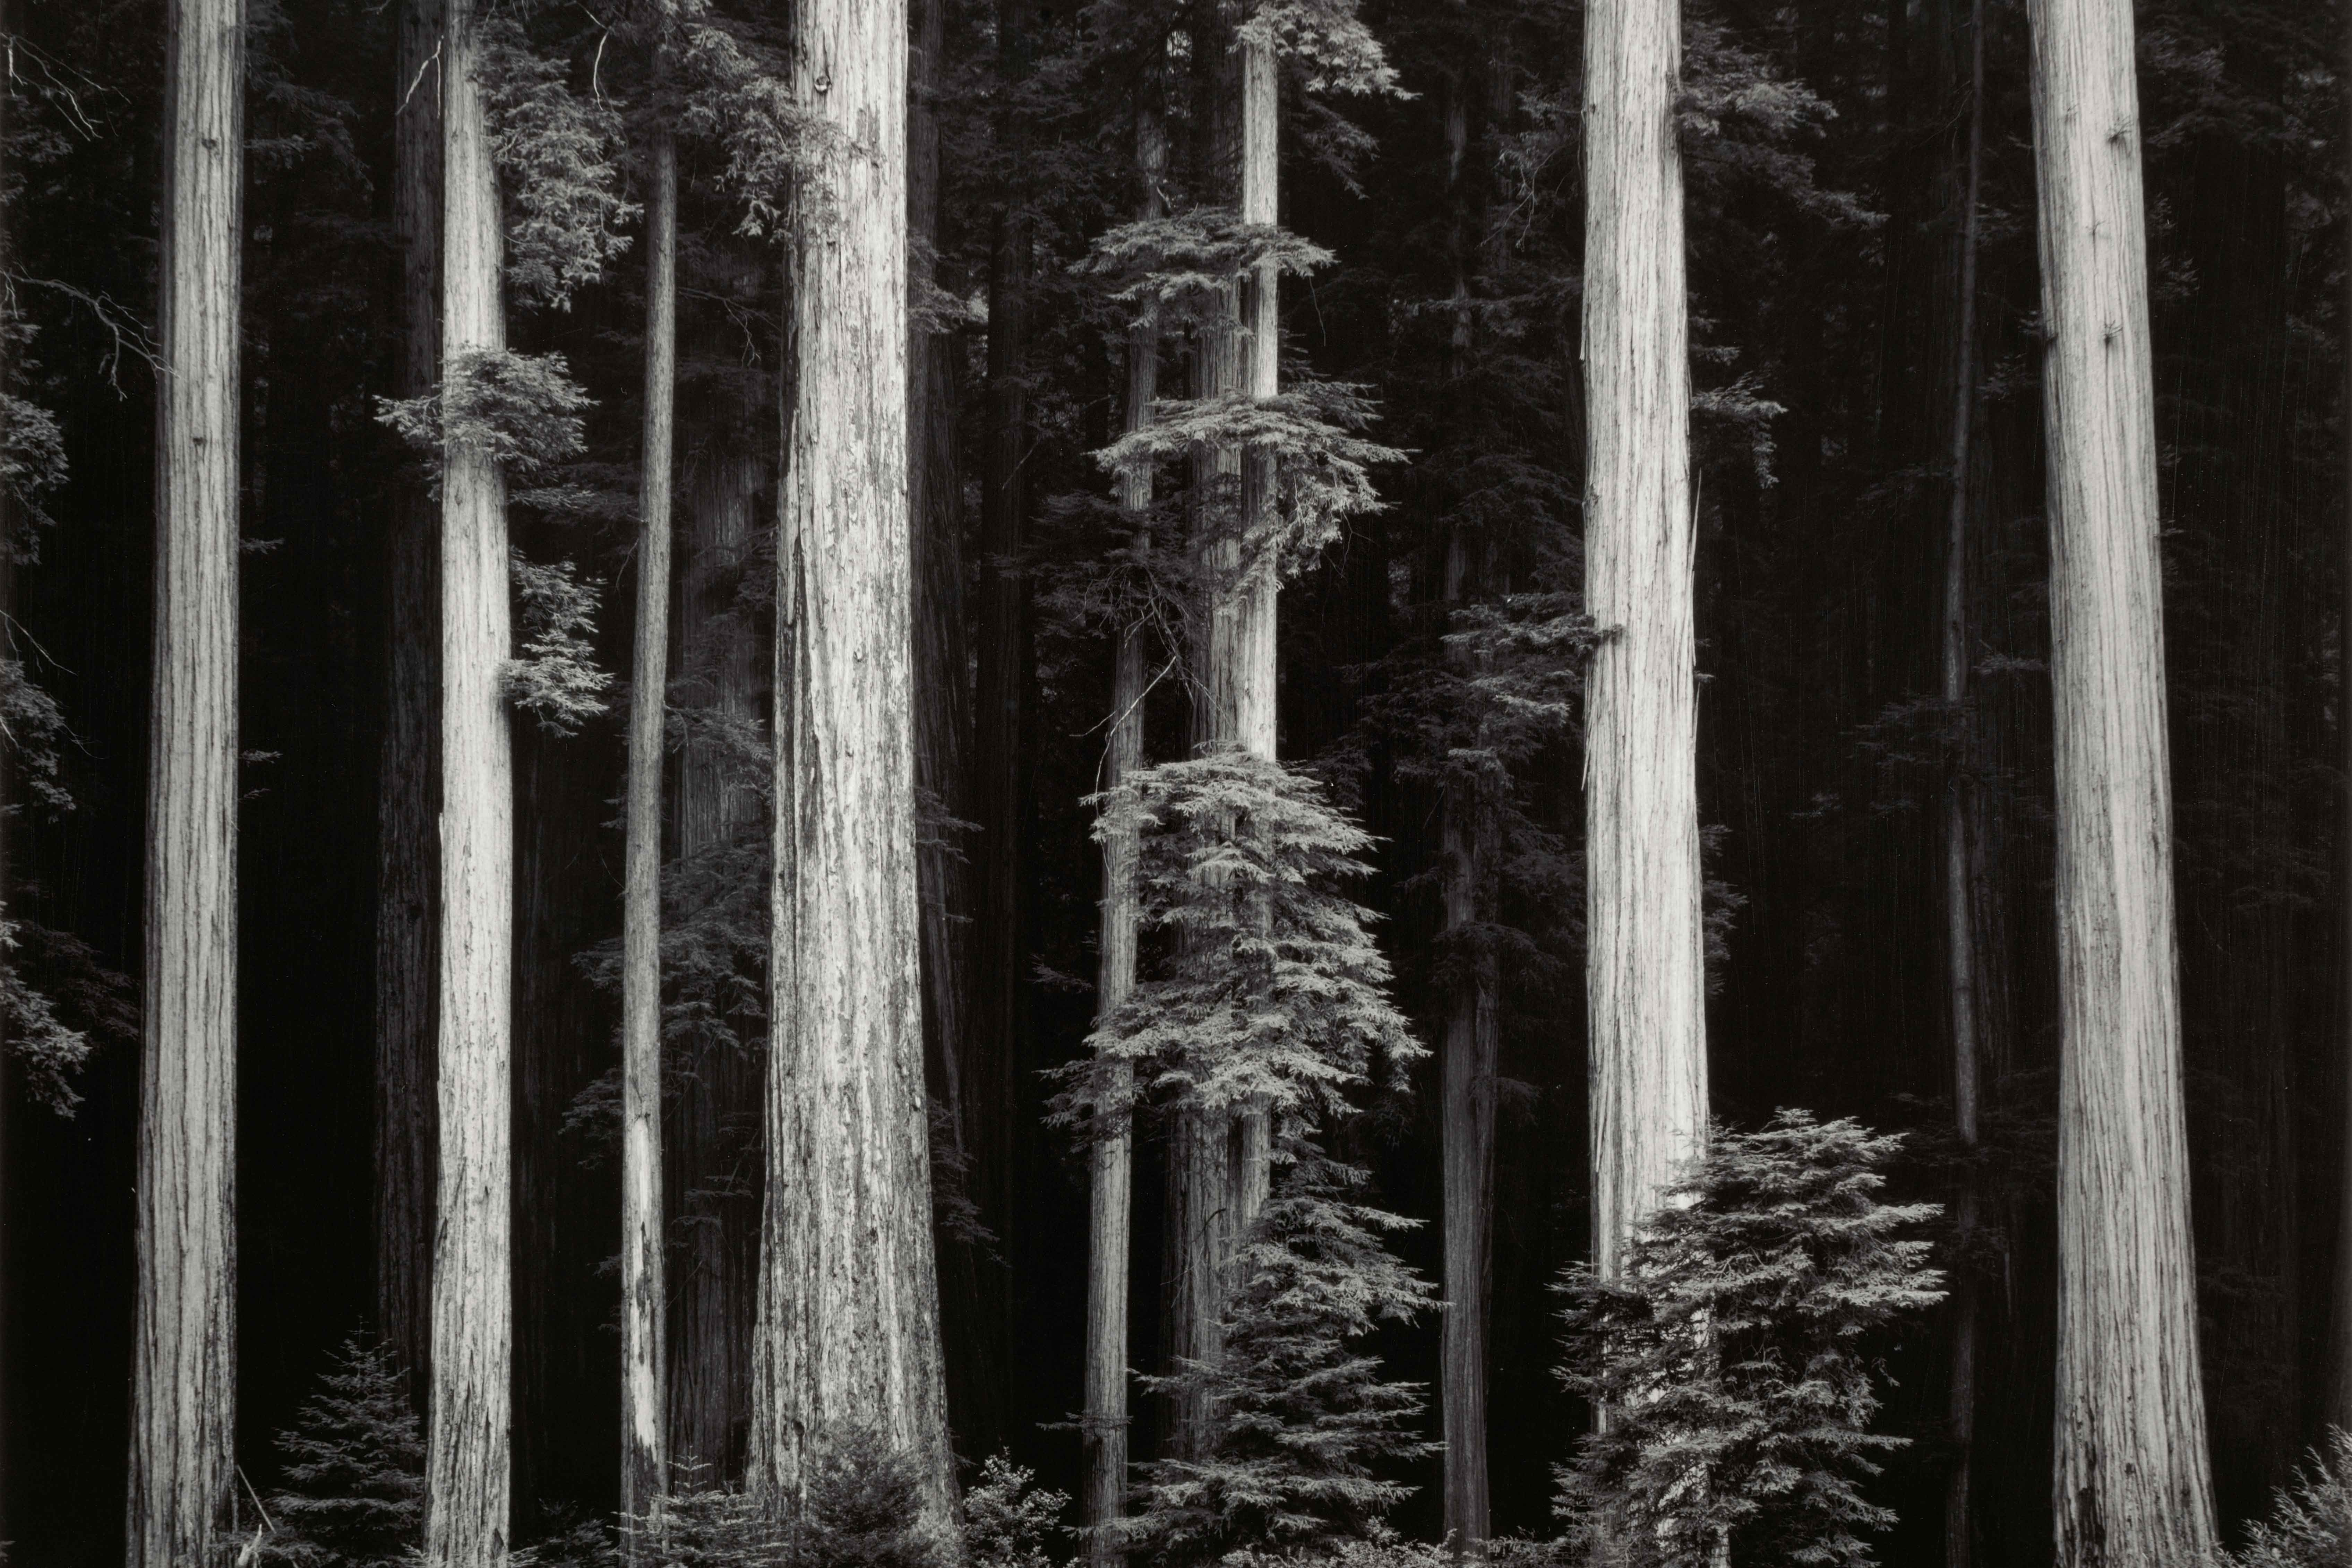 Ansel Adams (American, 1902–1984), Northern California Coast Redwoods, from Portfolio Four: What Majestic Word/In Memory of Russell Varian, detail, 1963, about 1960 negative, printed in 1963, gelatin silver print, 140/260. Bank of America Collection